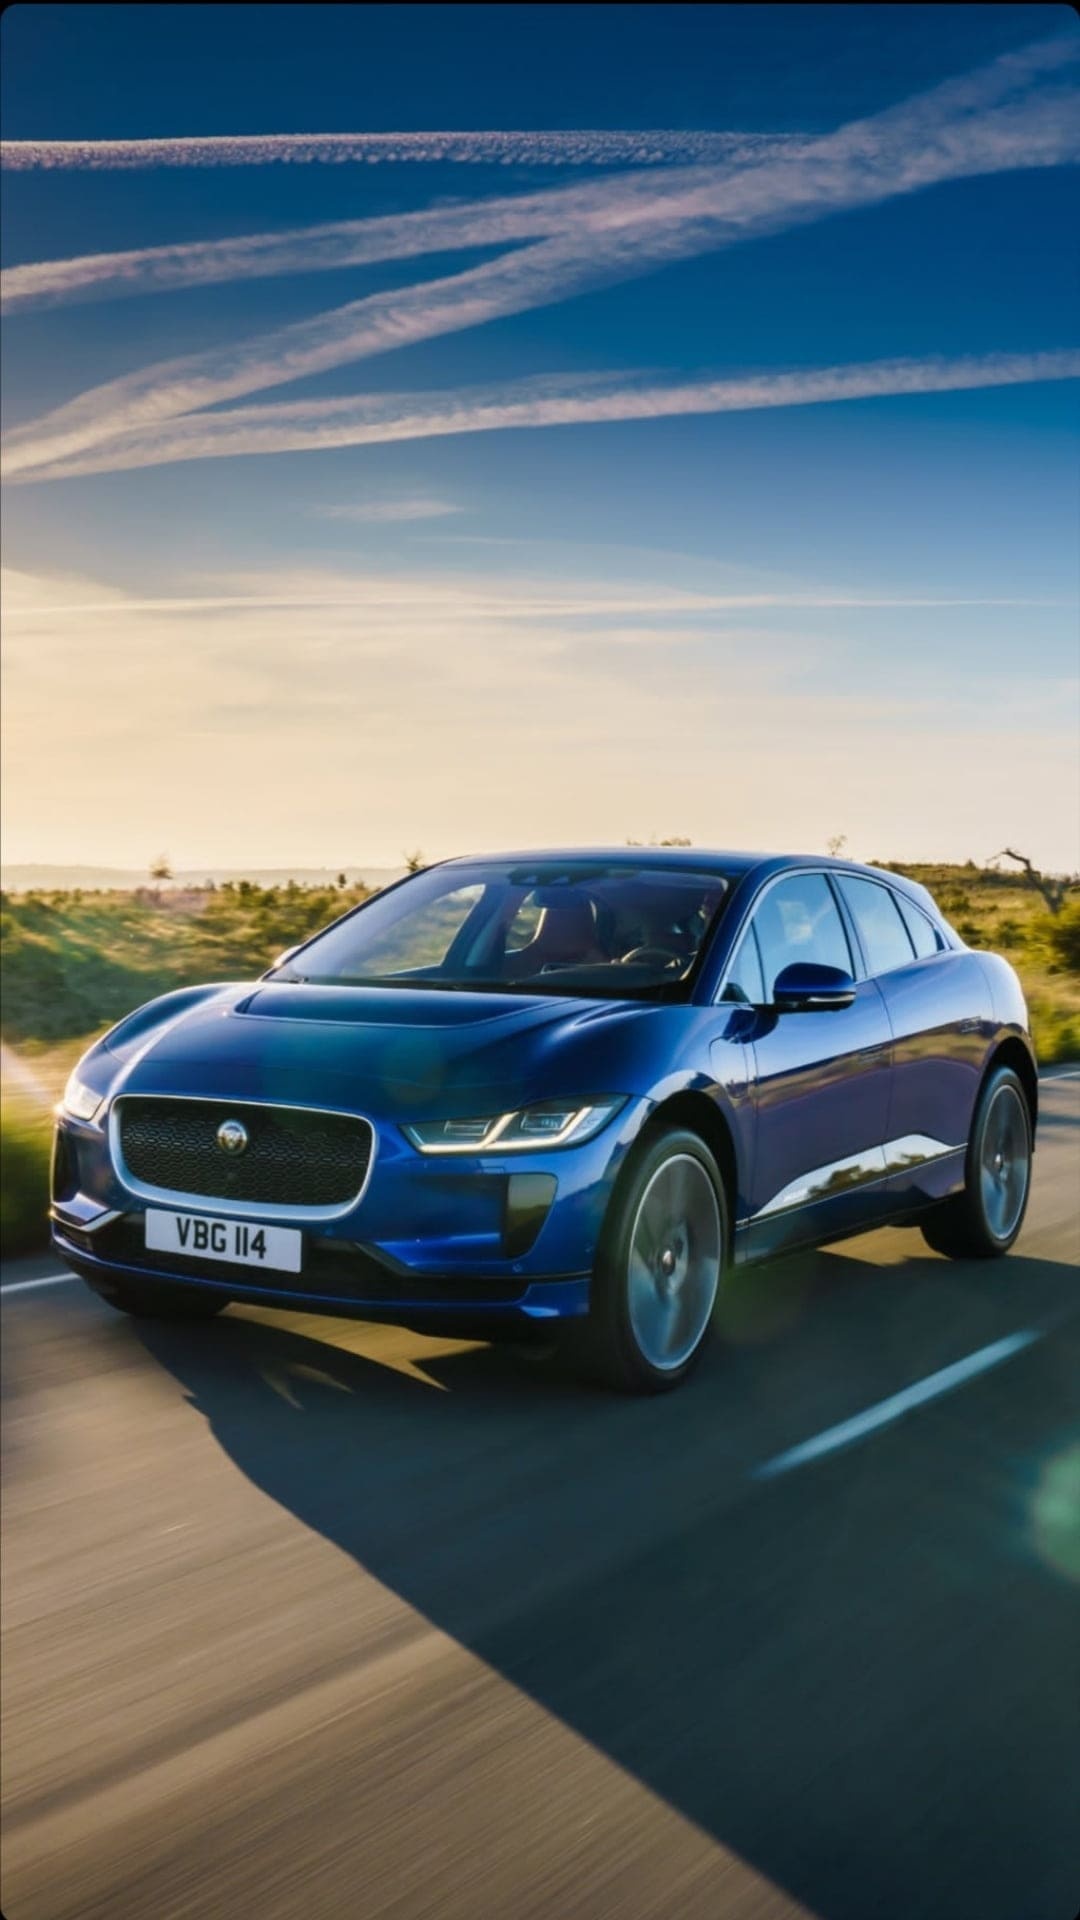 Jaguar I-PACE, Top free wallpapers, Breathtaking backgrounds, Striking images, 1080x1920 Full HD Phone